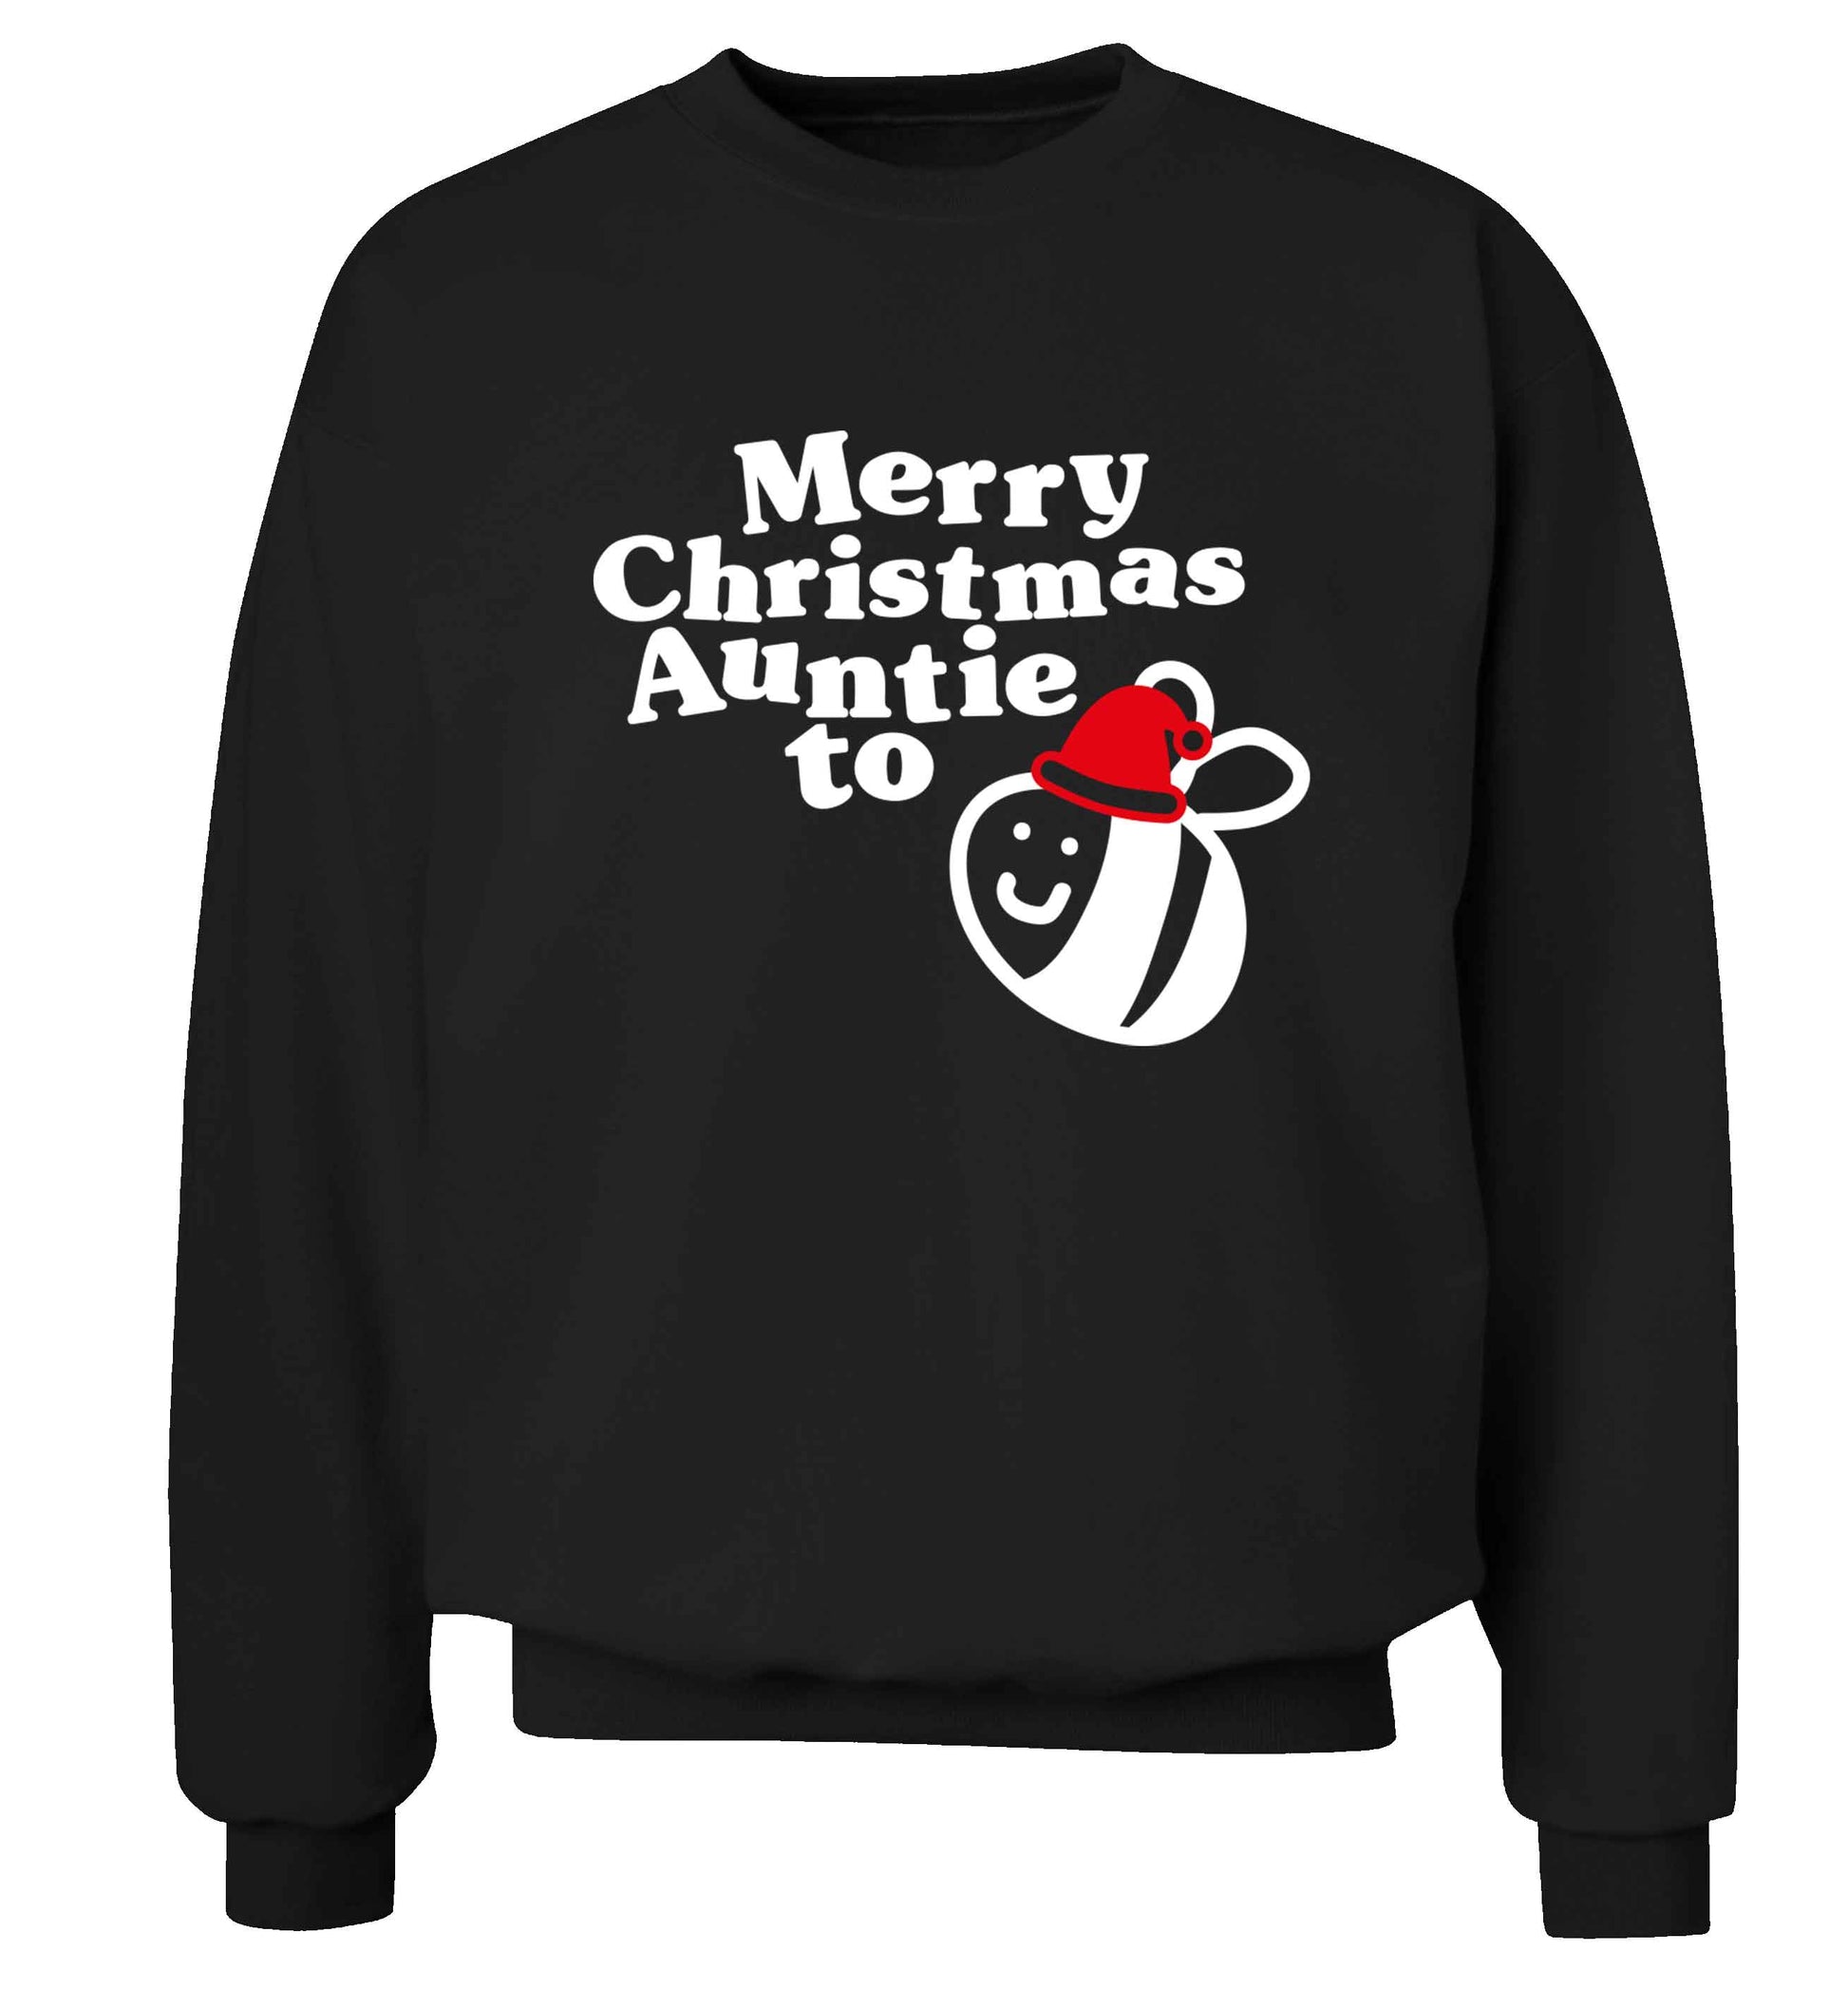 Merry Christmas auntie to be Adult's unisex black Sweater 2XL